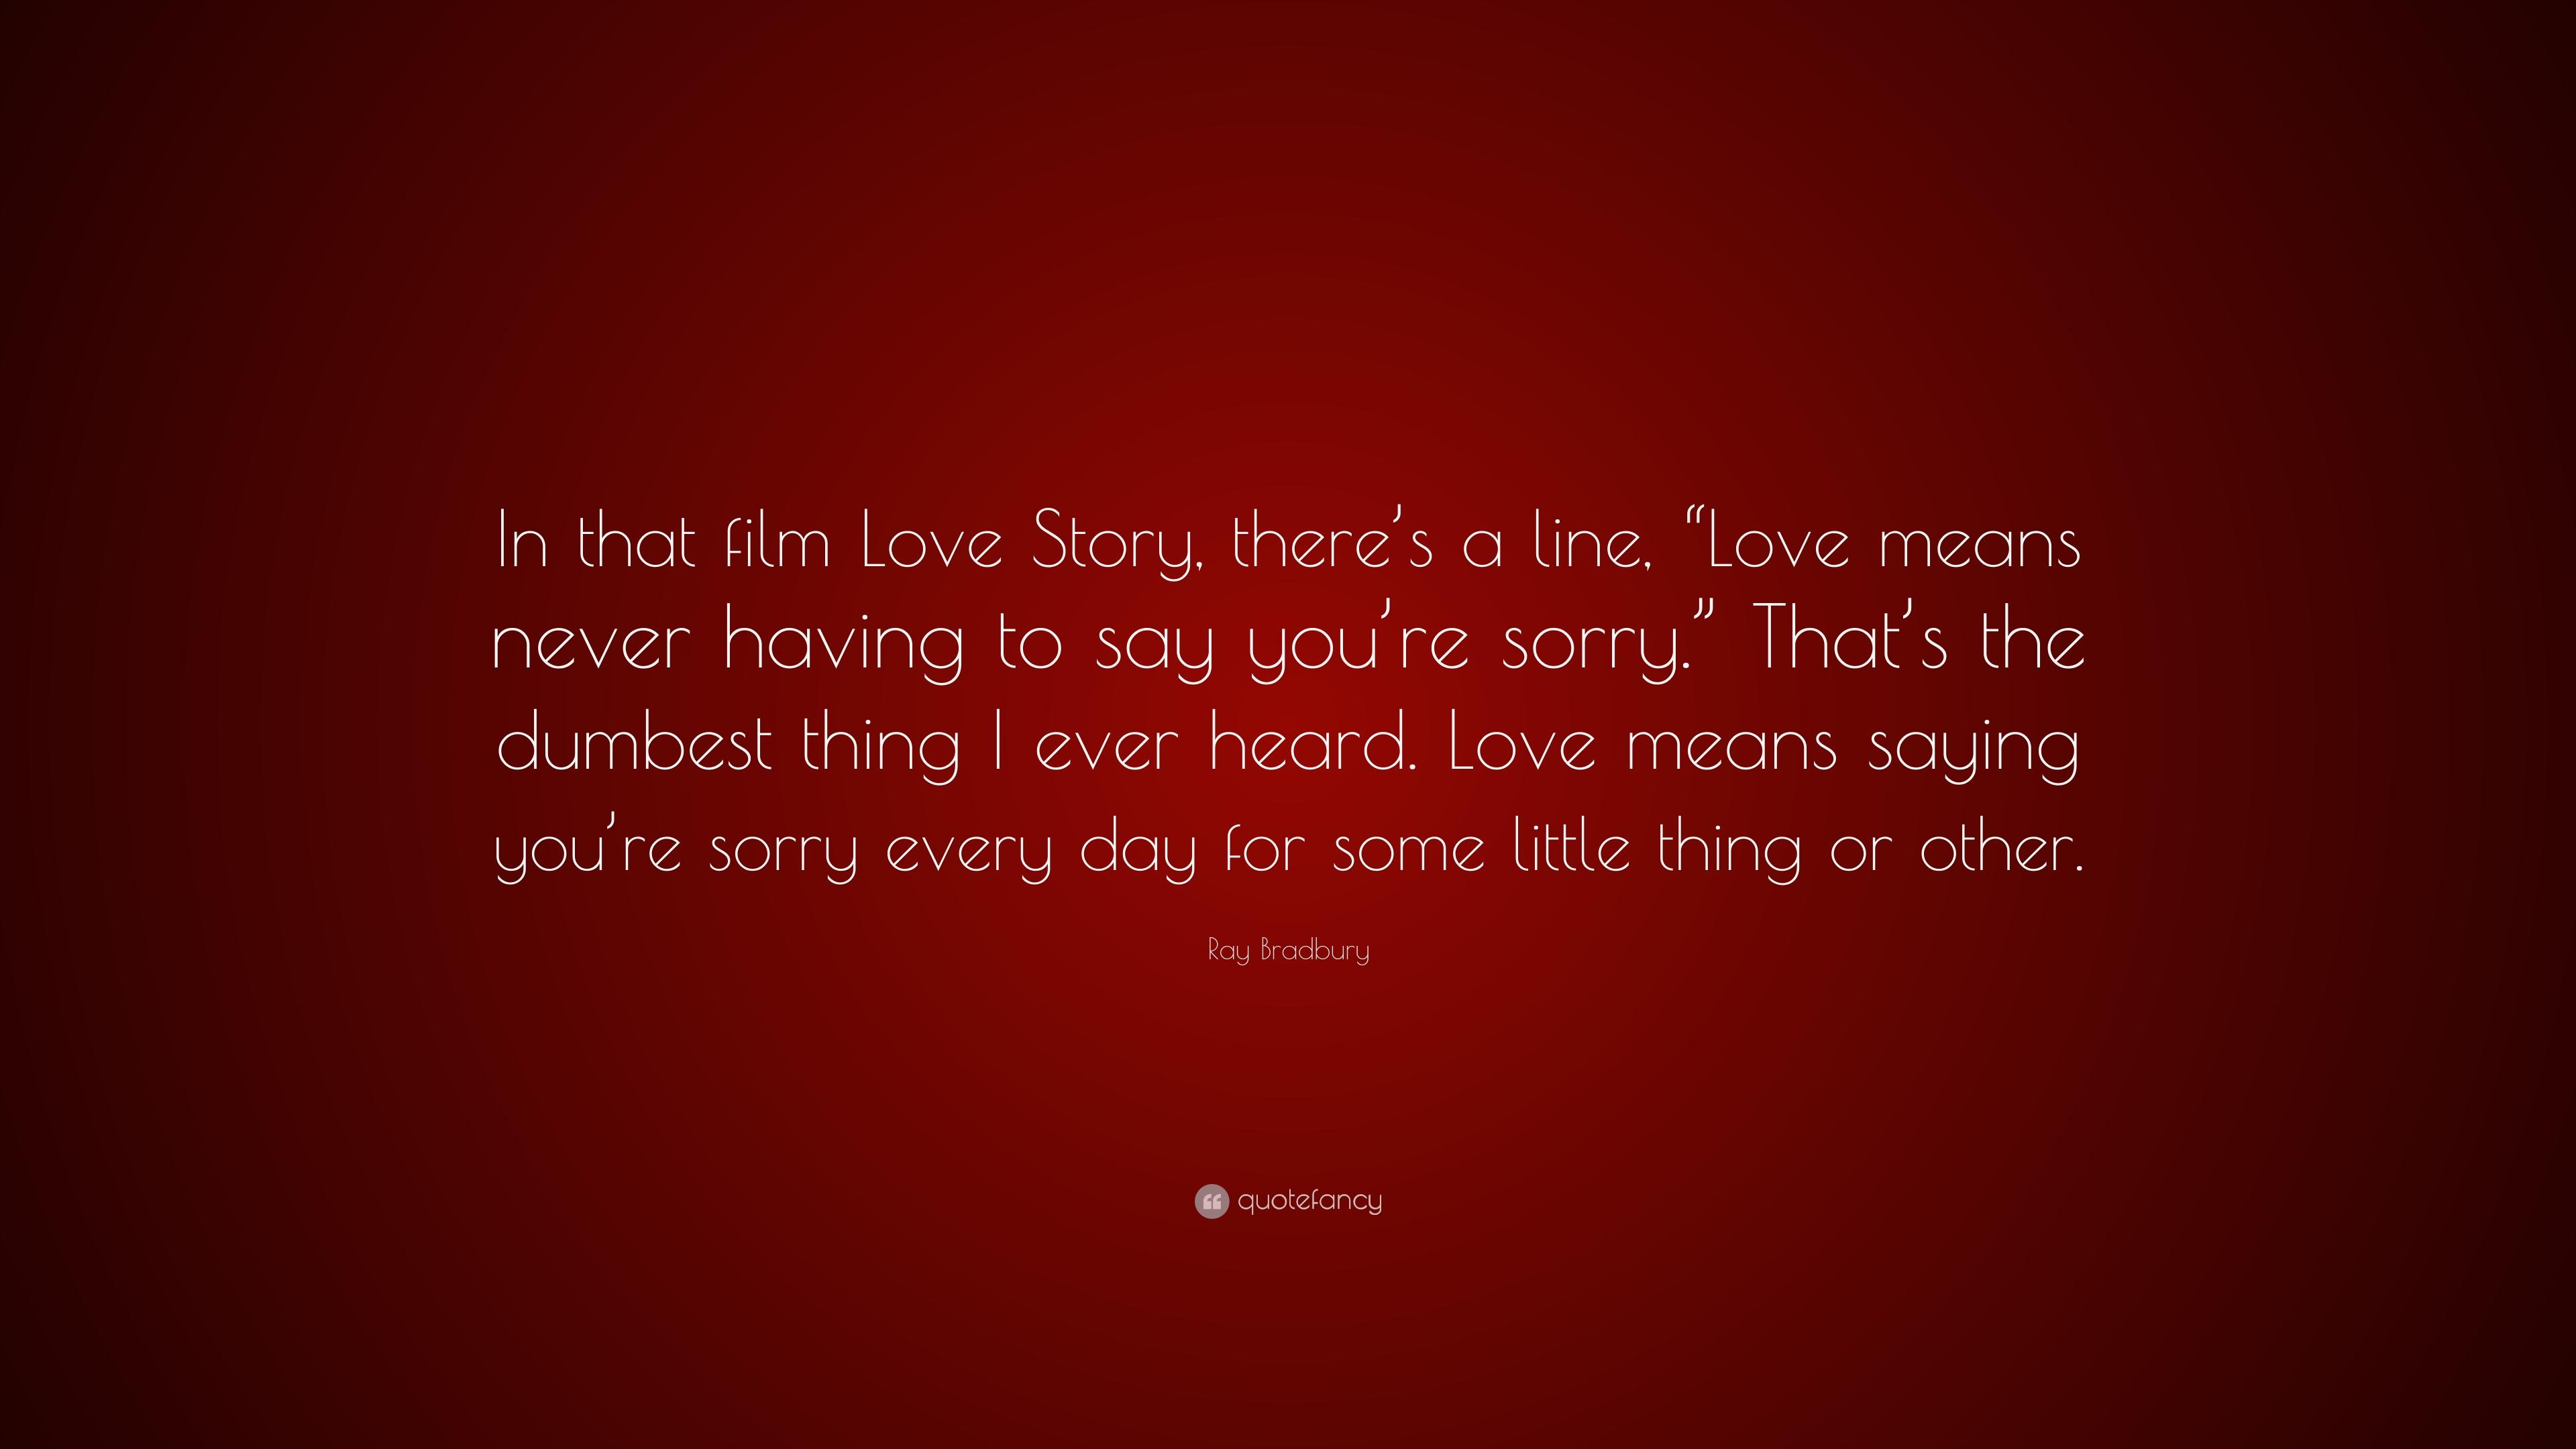 Ray Bradbury Quote: “In that film Love Story, there's a line, “Love